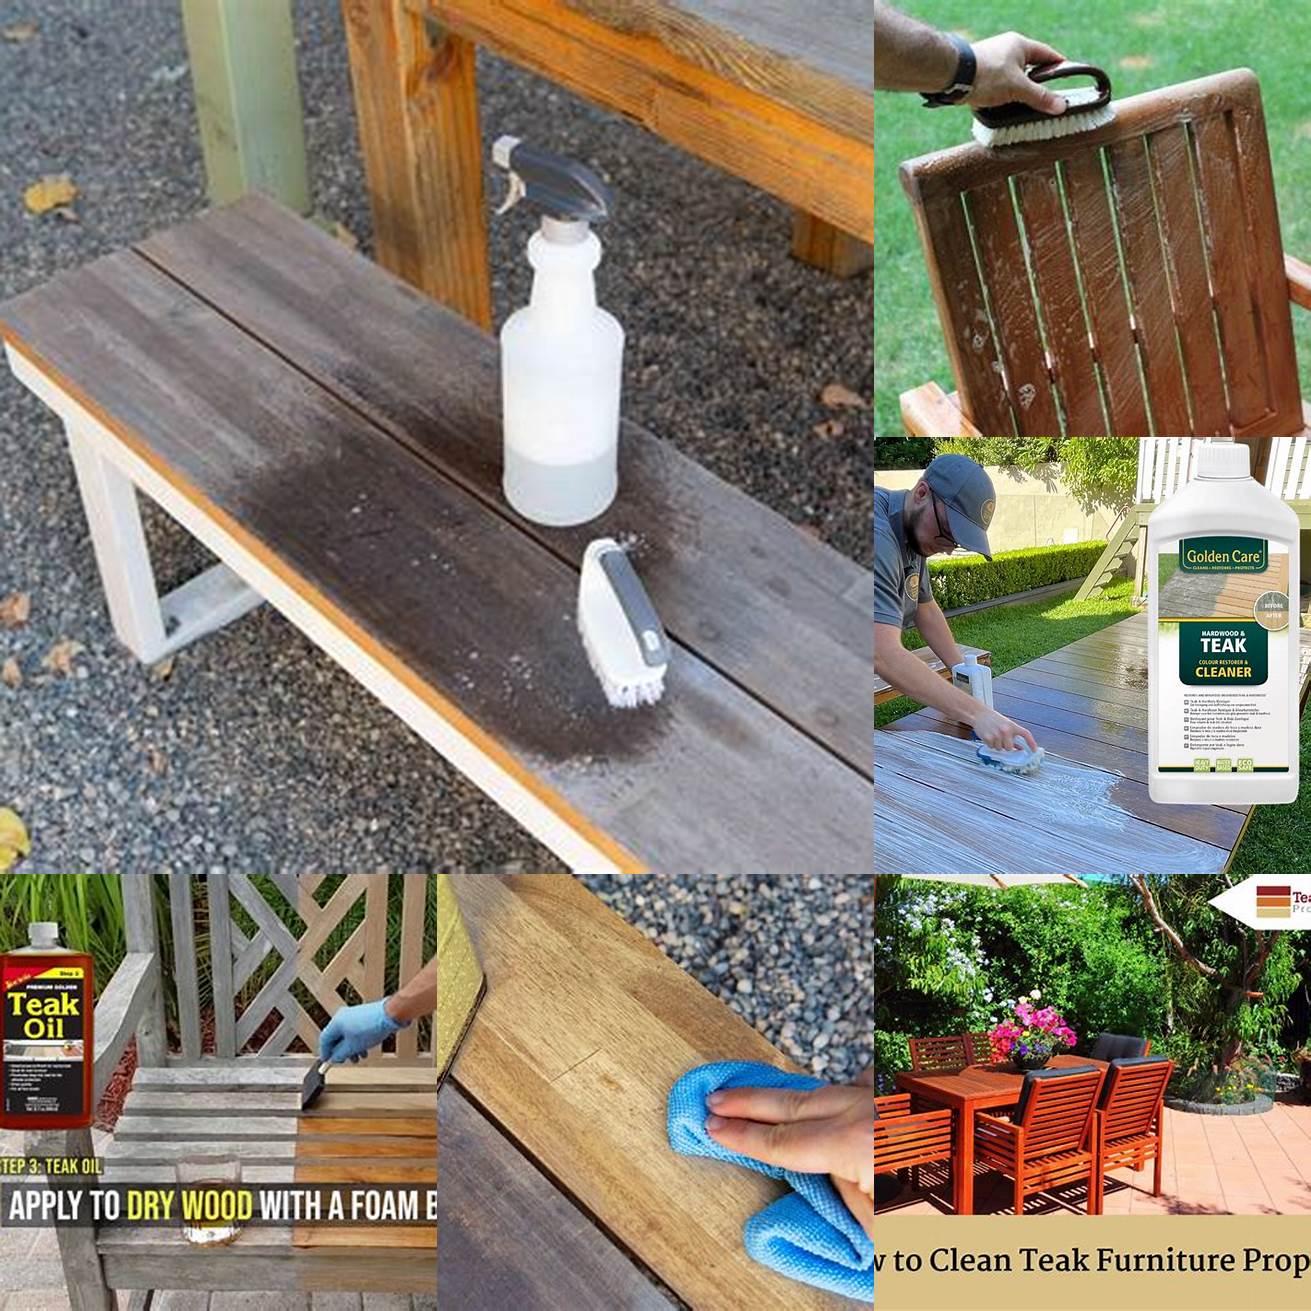 Cleaning teak with soap and water